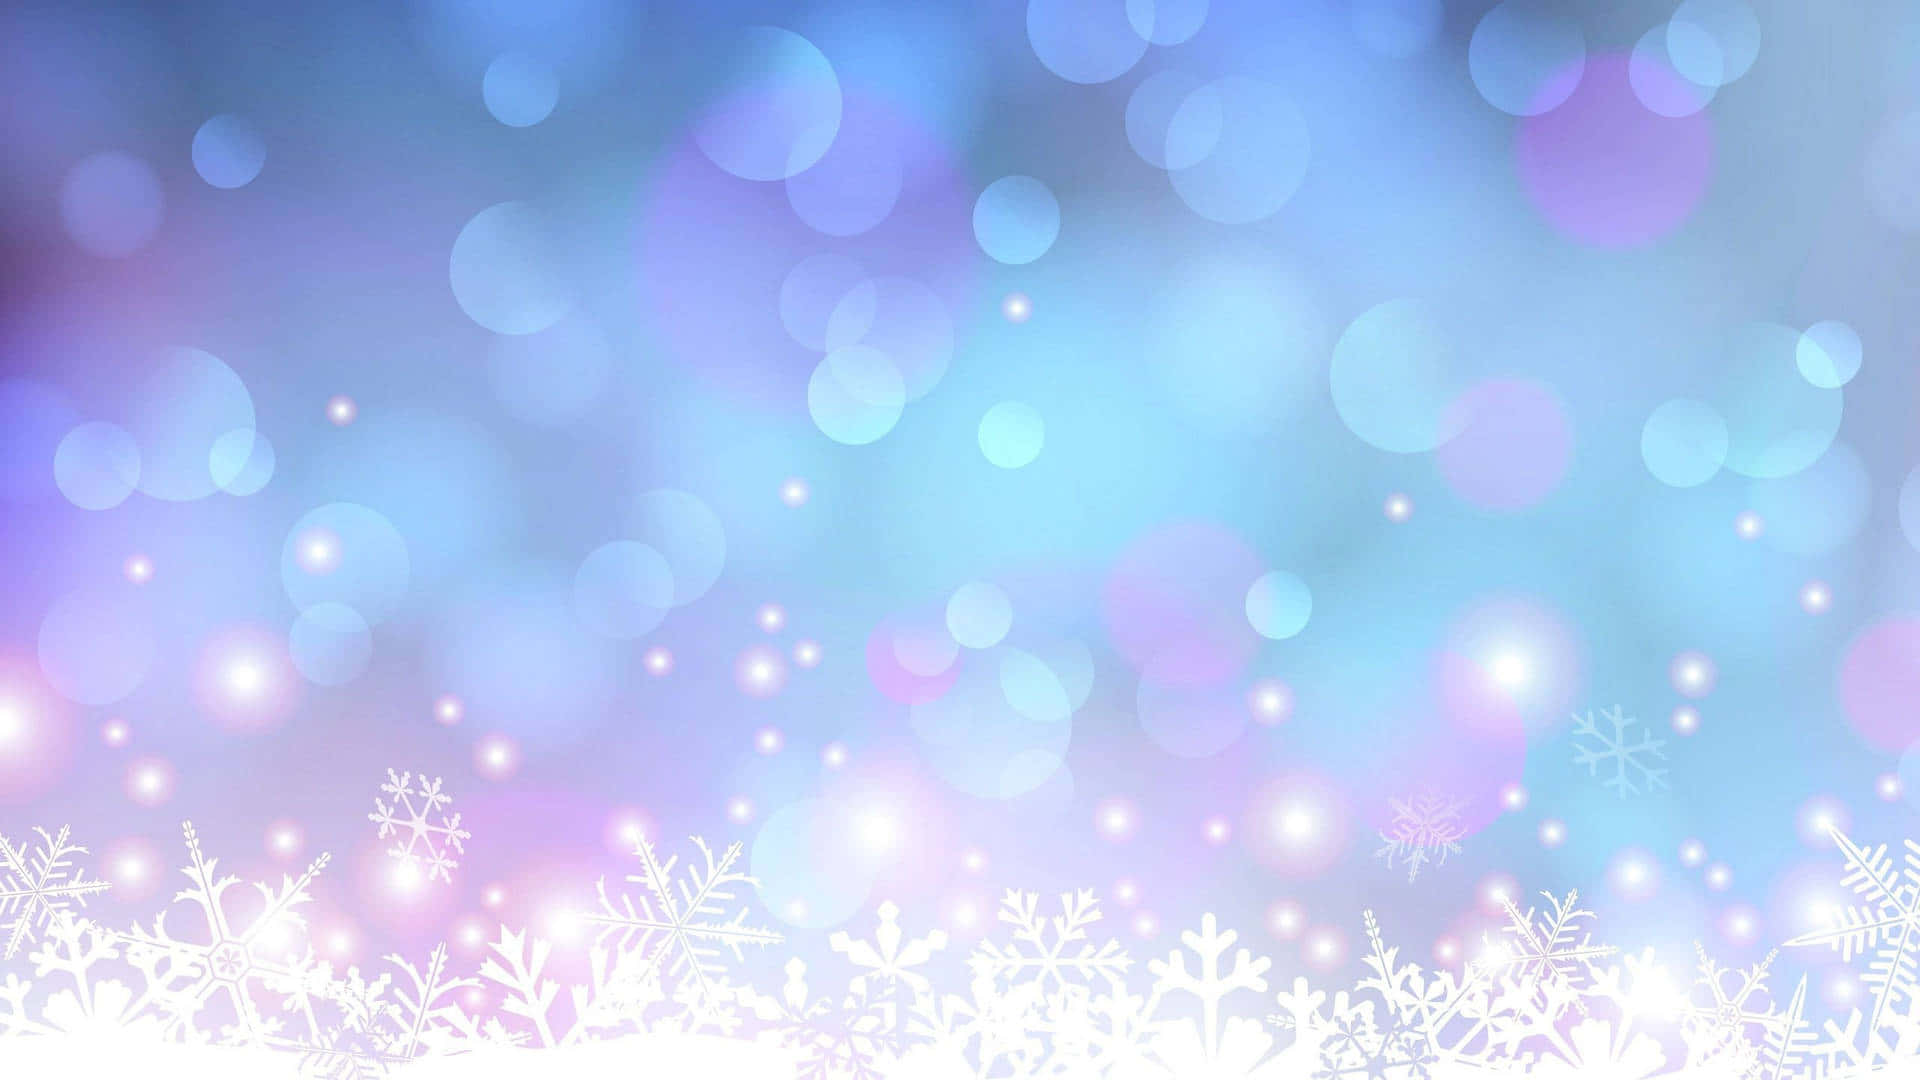 A Delicate Snowfall - Snowflakes Background.